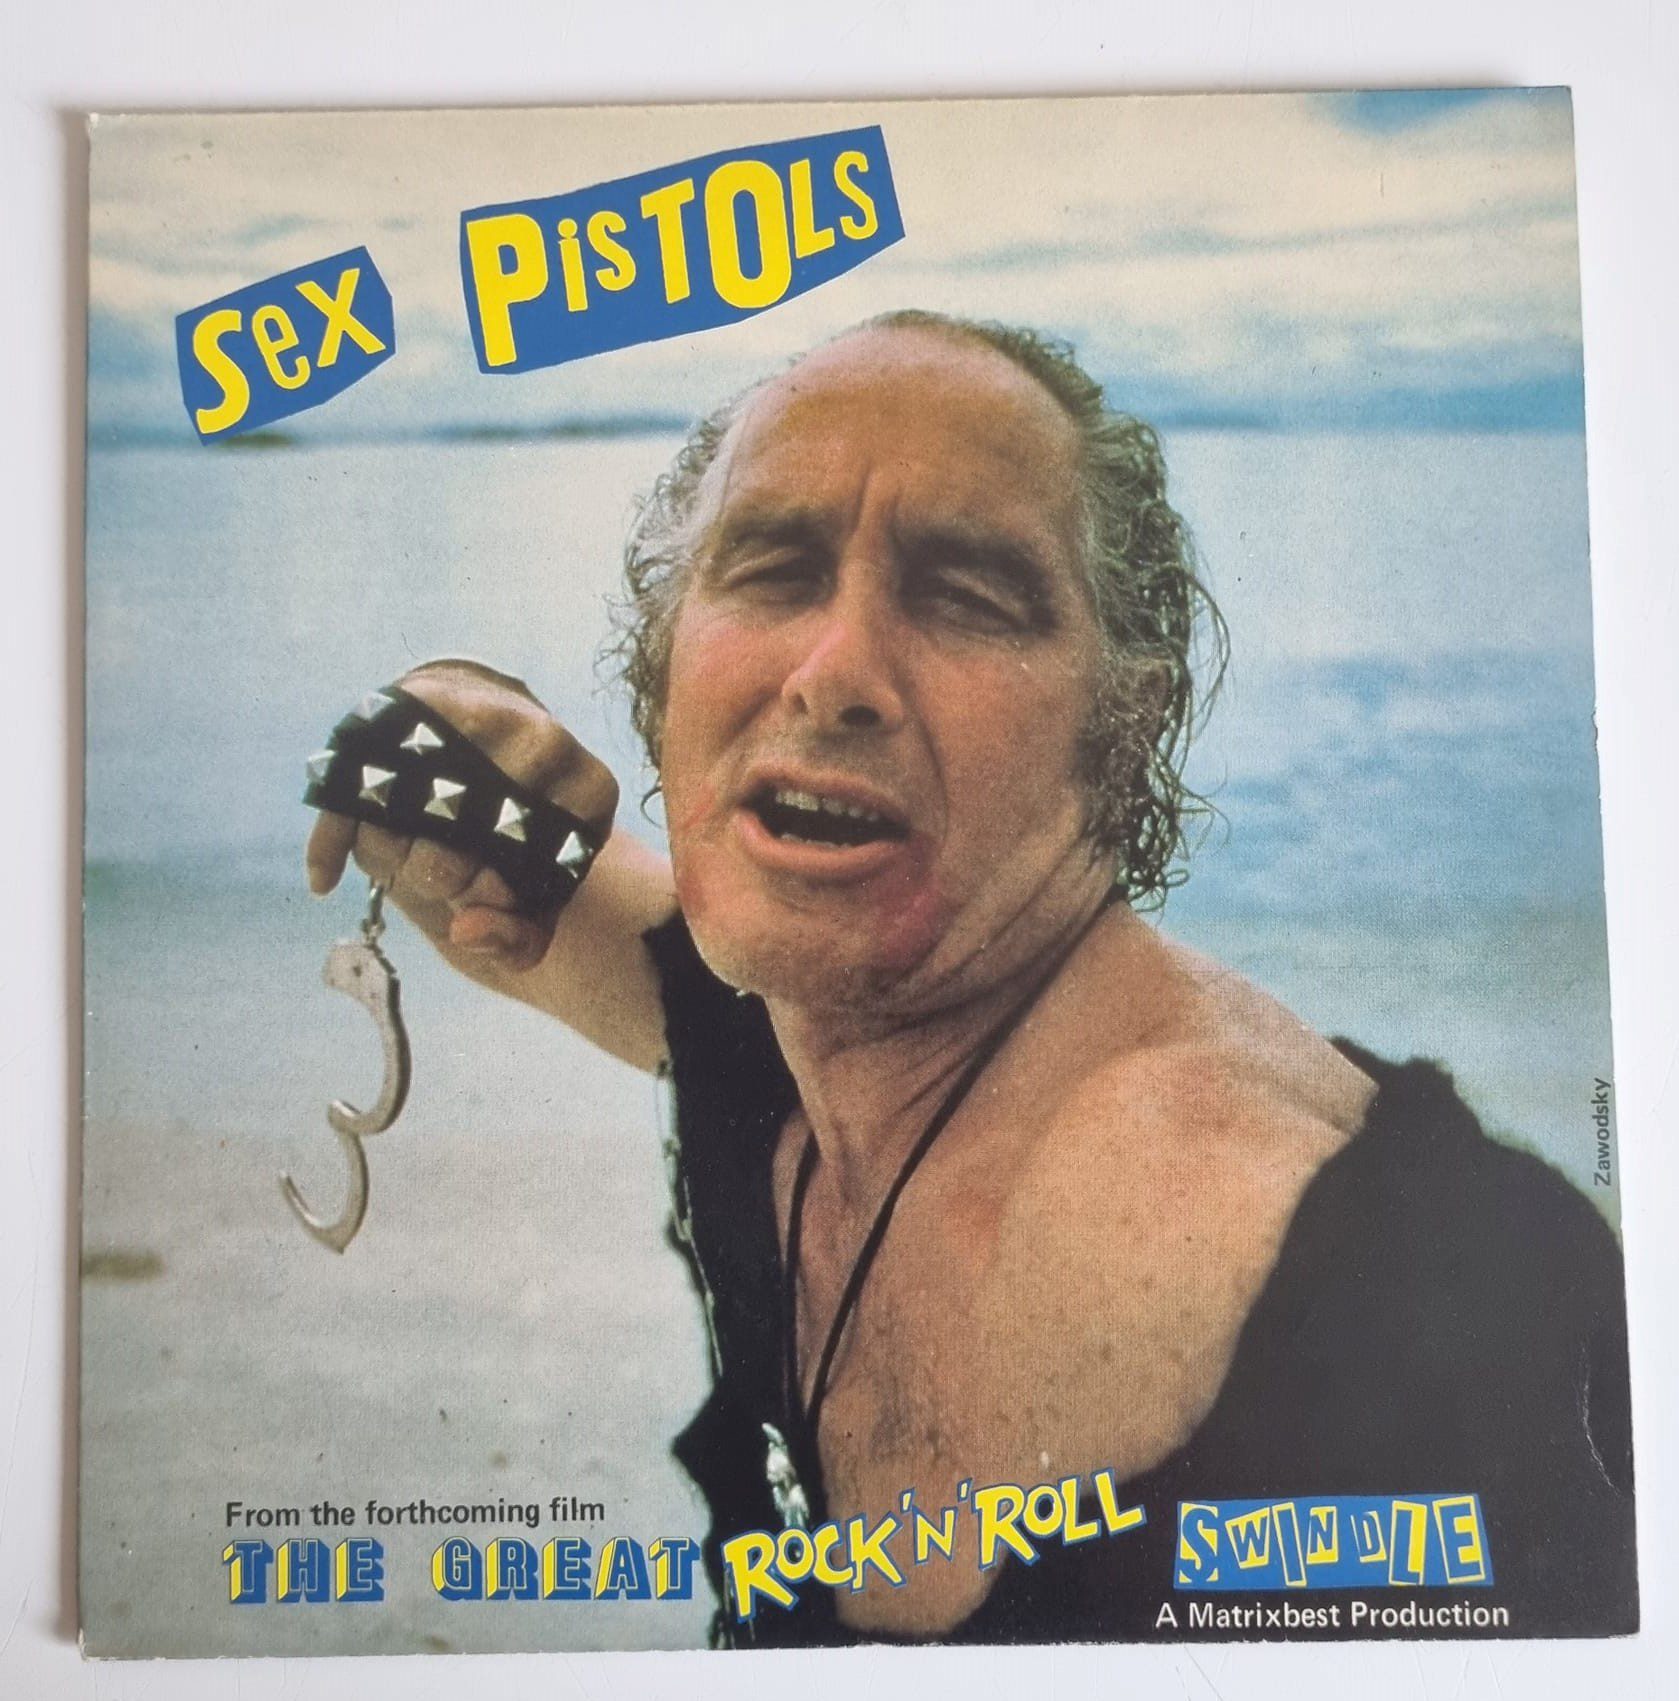 Buy this rare Sex Pistols record by clicking here